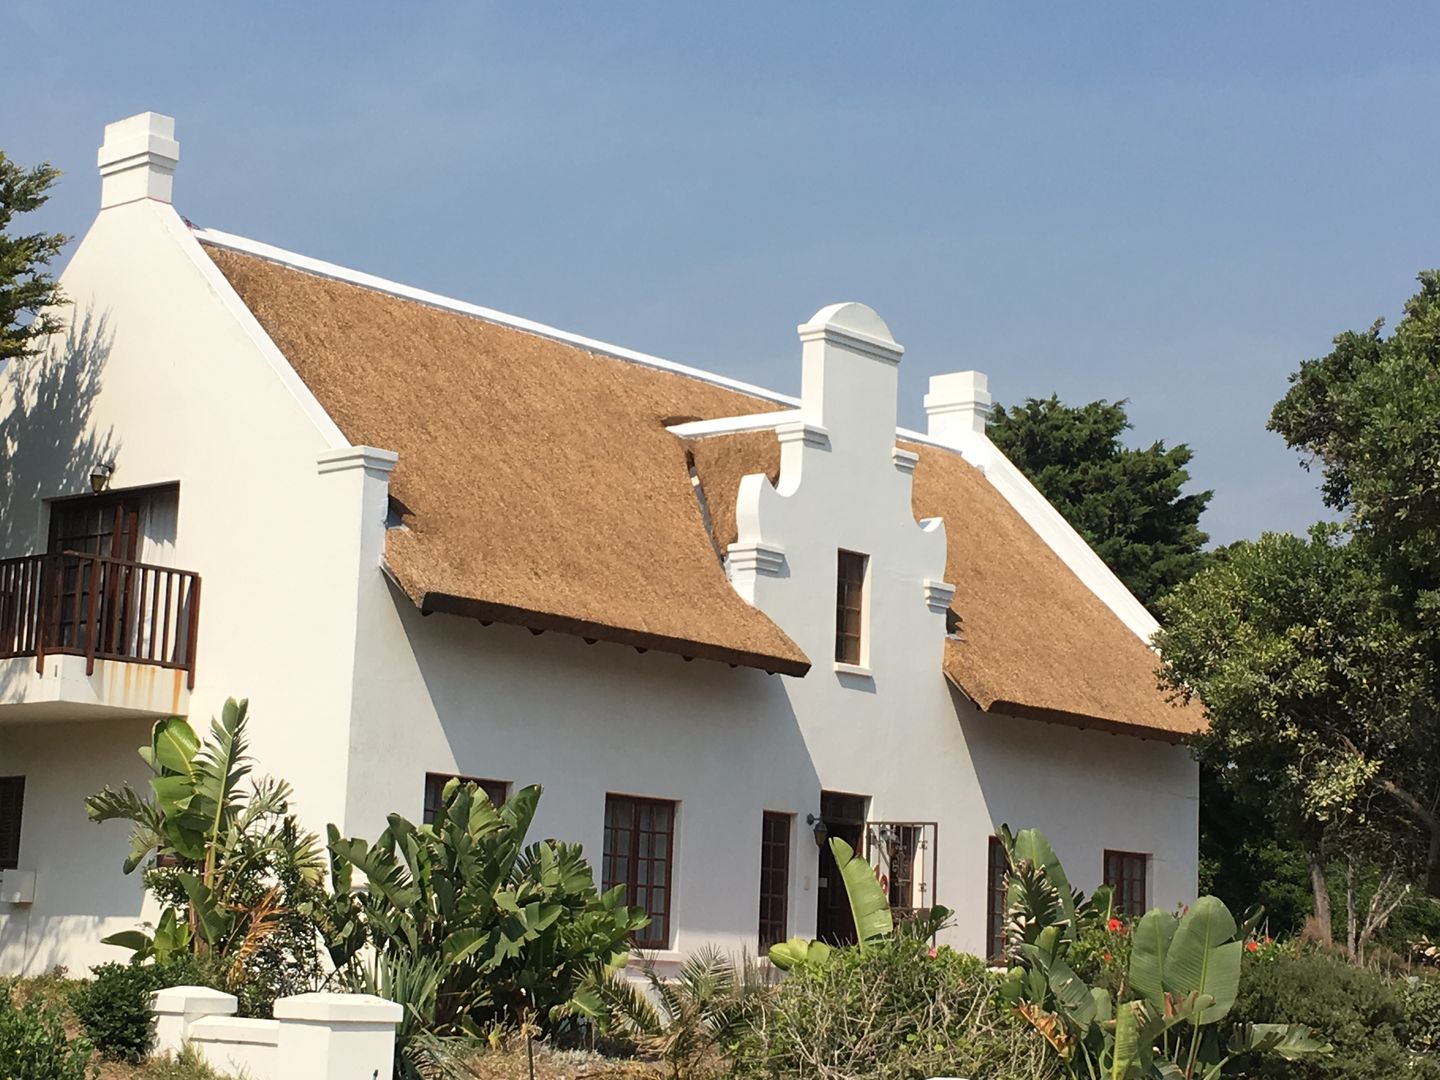 Traditional Thatched Home, Bosazza Roofing & Timber Homes Bosazza Roofing & Timber Homes Casa coloniale